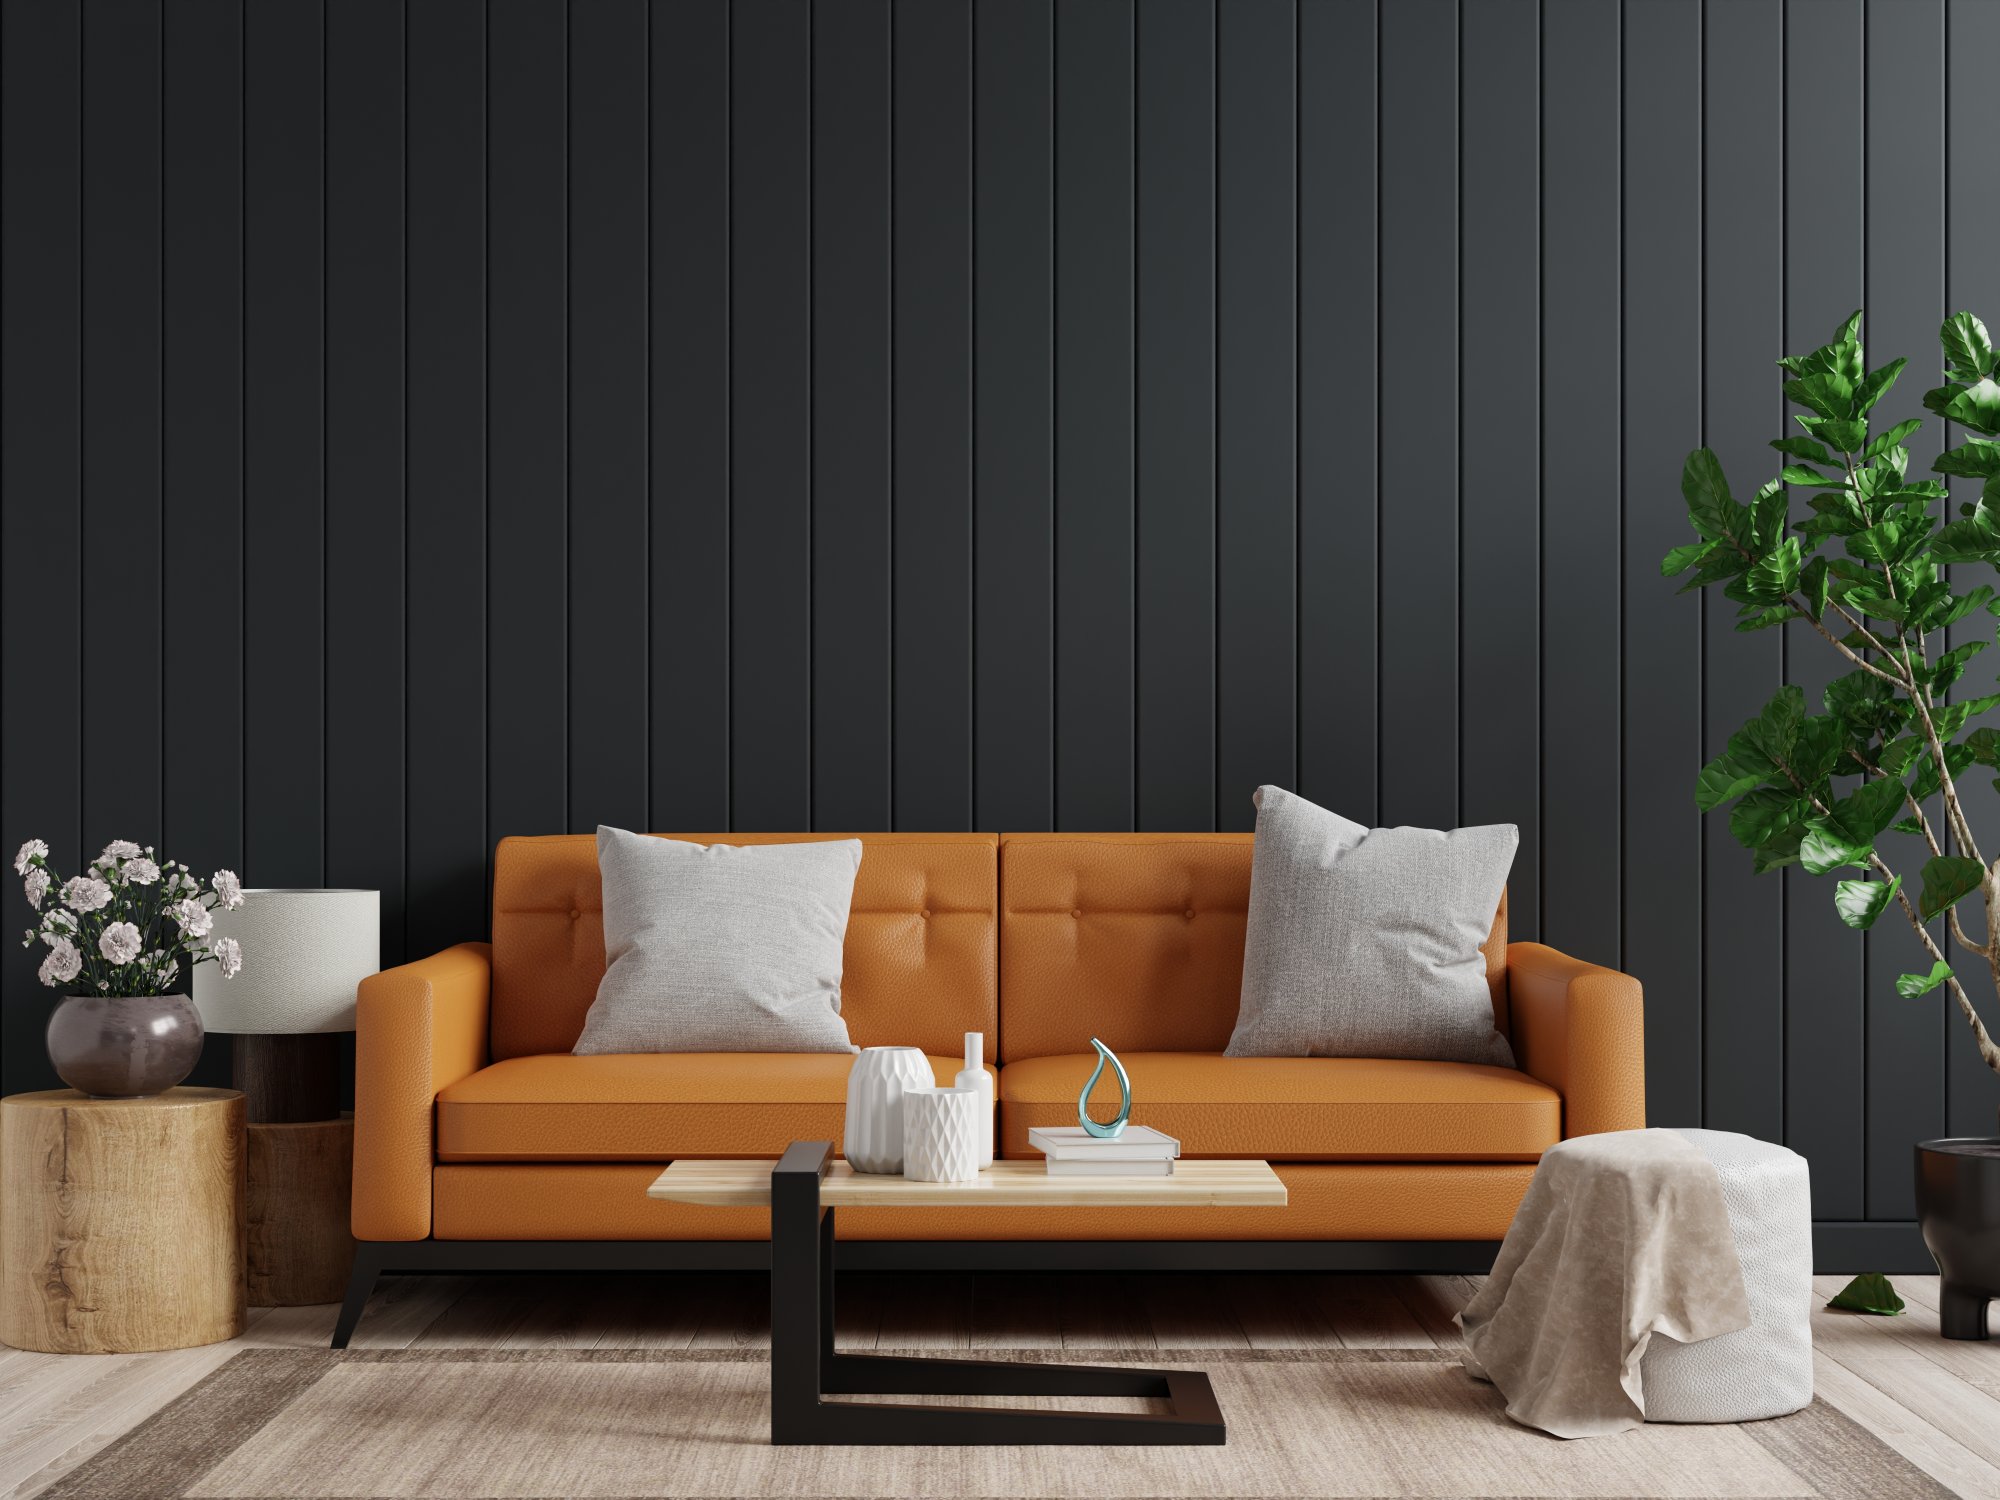 mockup-wall-dark-living-room-interior-background-with-leather-sofa-table-empty-dark-wooden-wall-3d-rendering